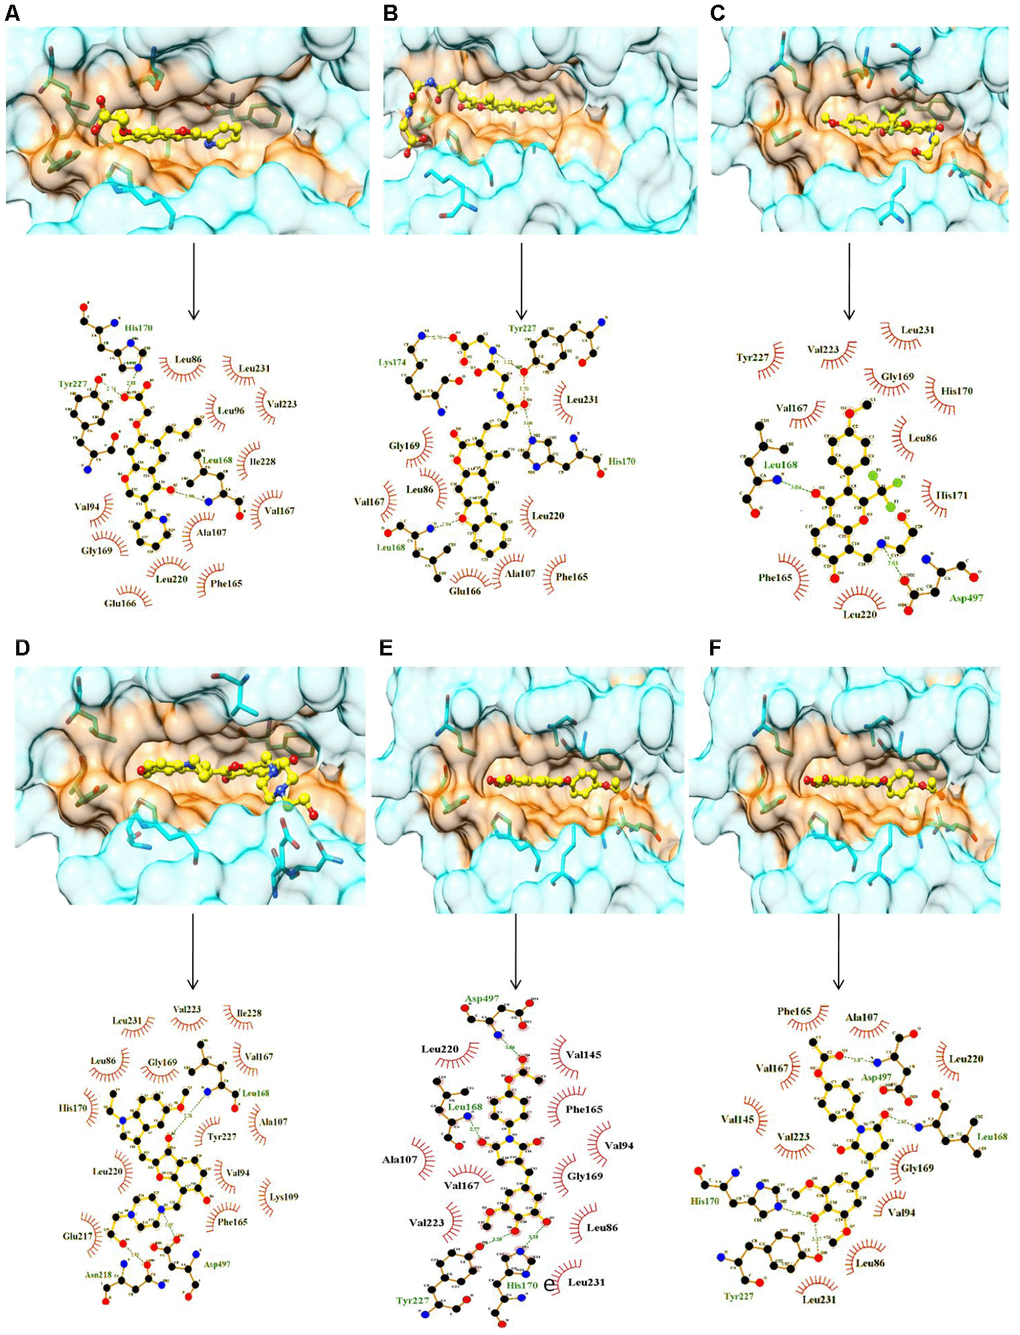 Surface and ligplot diagrams showing docking and binding interactions of selected compounds at the ATP site of SRPK1. (A) Compound C01, (B) Compound C02, (C) Compound C03, (D) Compound C04, (E) Compound C05, (F) Compound C06. All compounds occupied the similar space in the binding site. It is noteworthy to observe the additional unique Interactions of compound C02 with His170, Tyr227 and Lys174 amino acid residues of SRPK1.